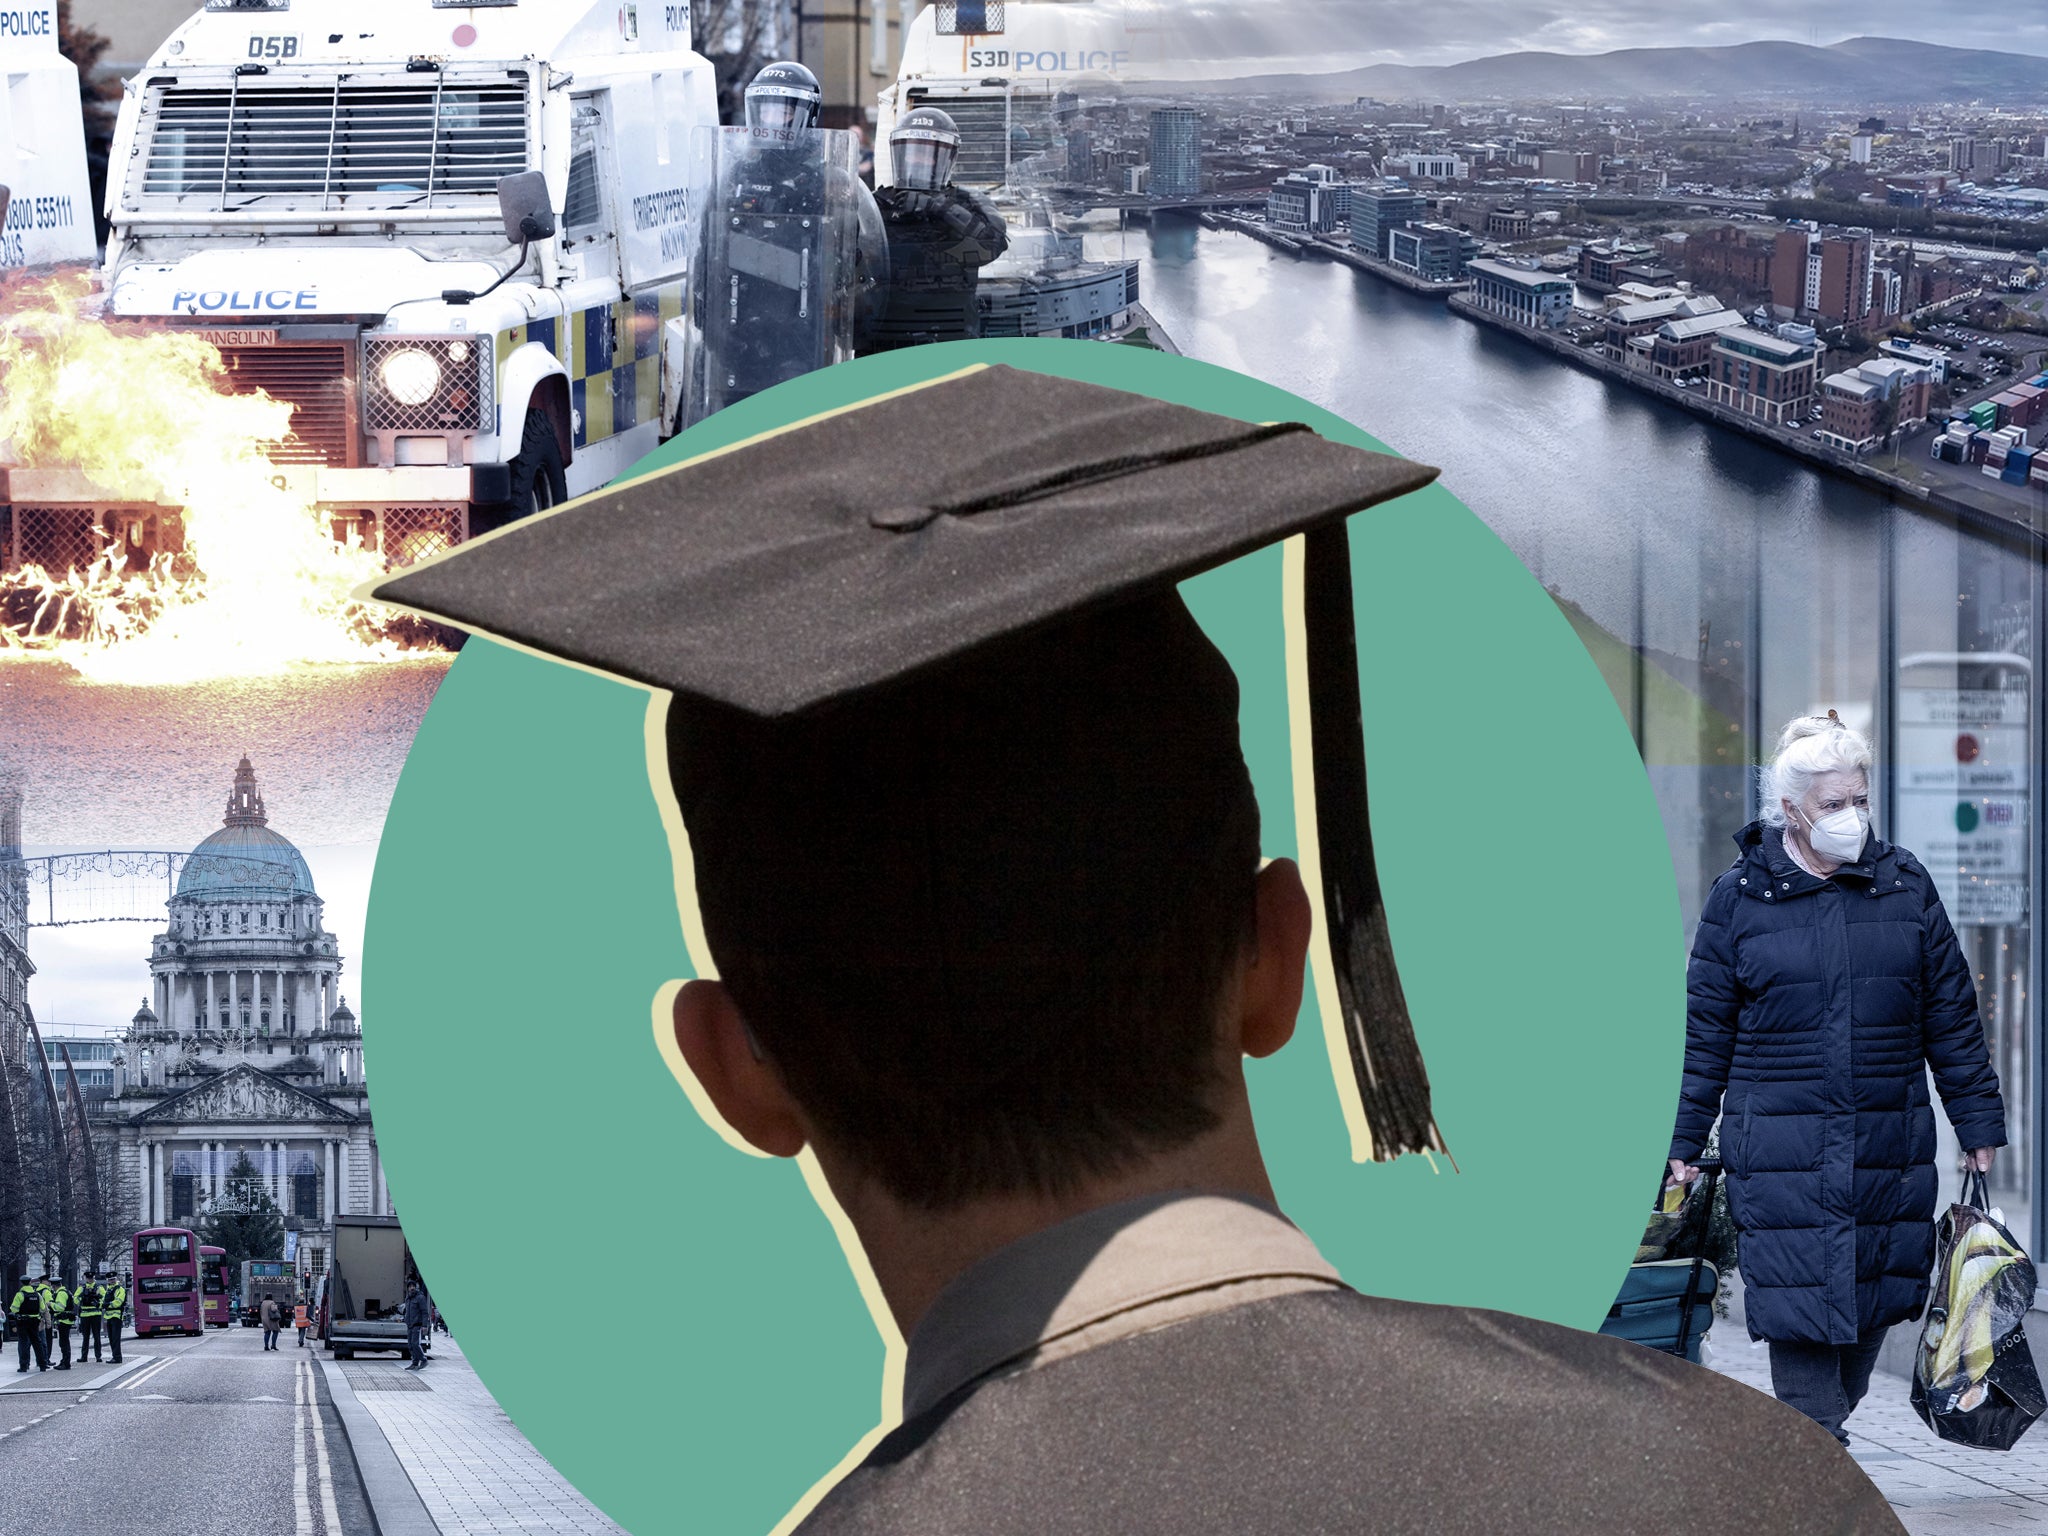 Northern Ireland faces a daunting economic task: how to stop so many students and qualified graduates from leaving and never coming back